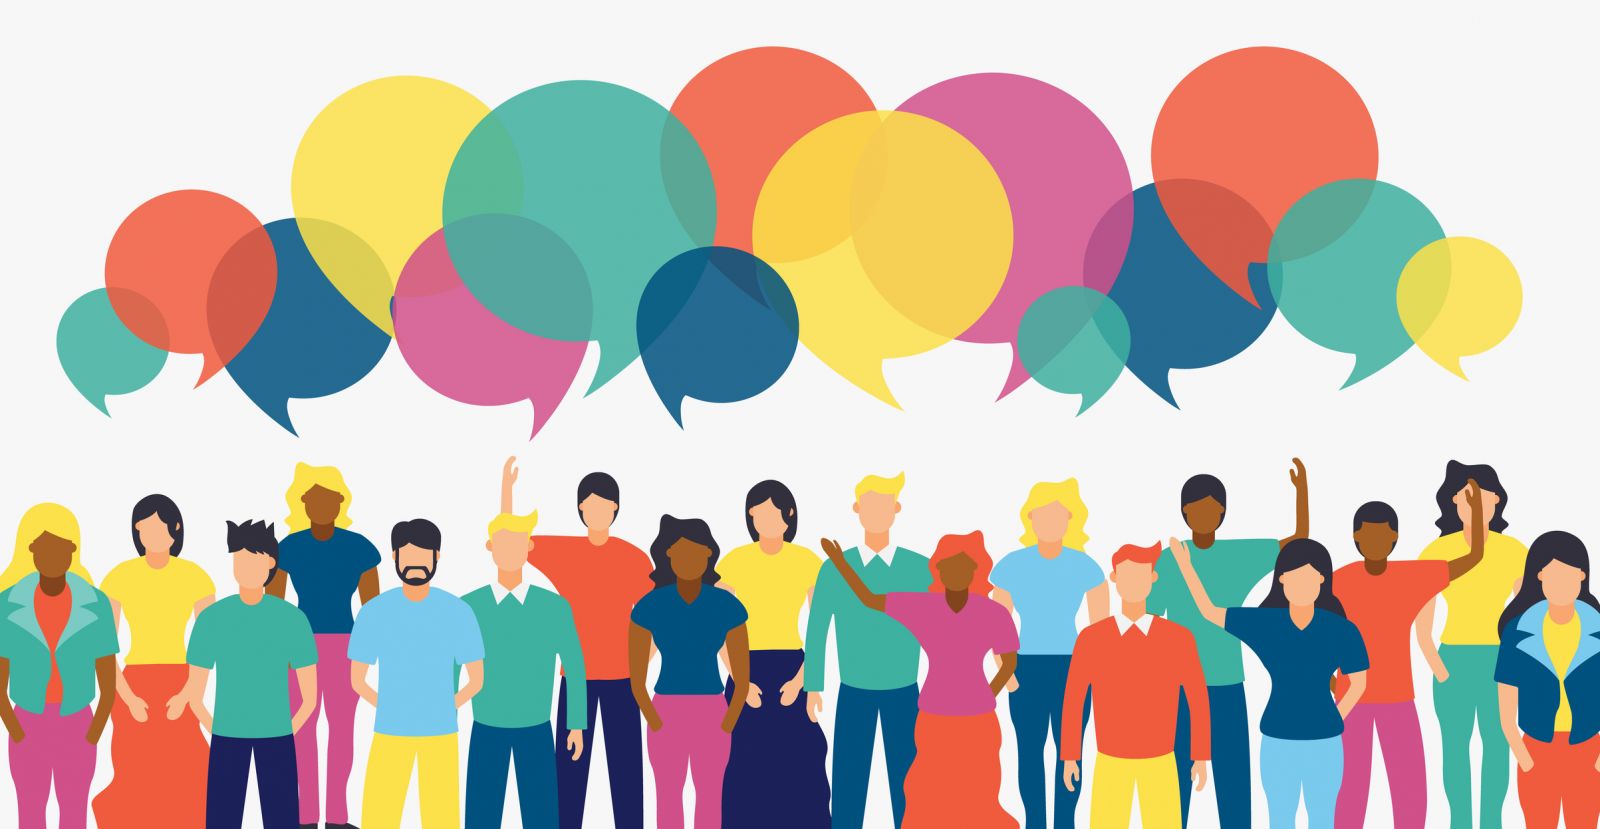 Illustration of crowd with speech bubbles above heads banner image